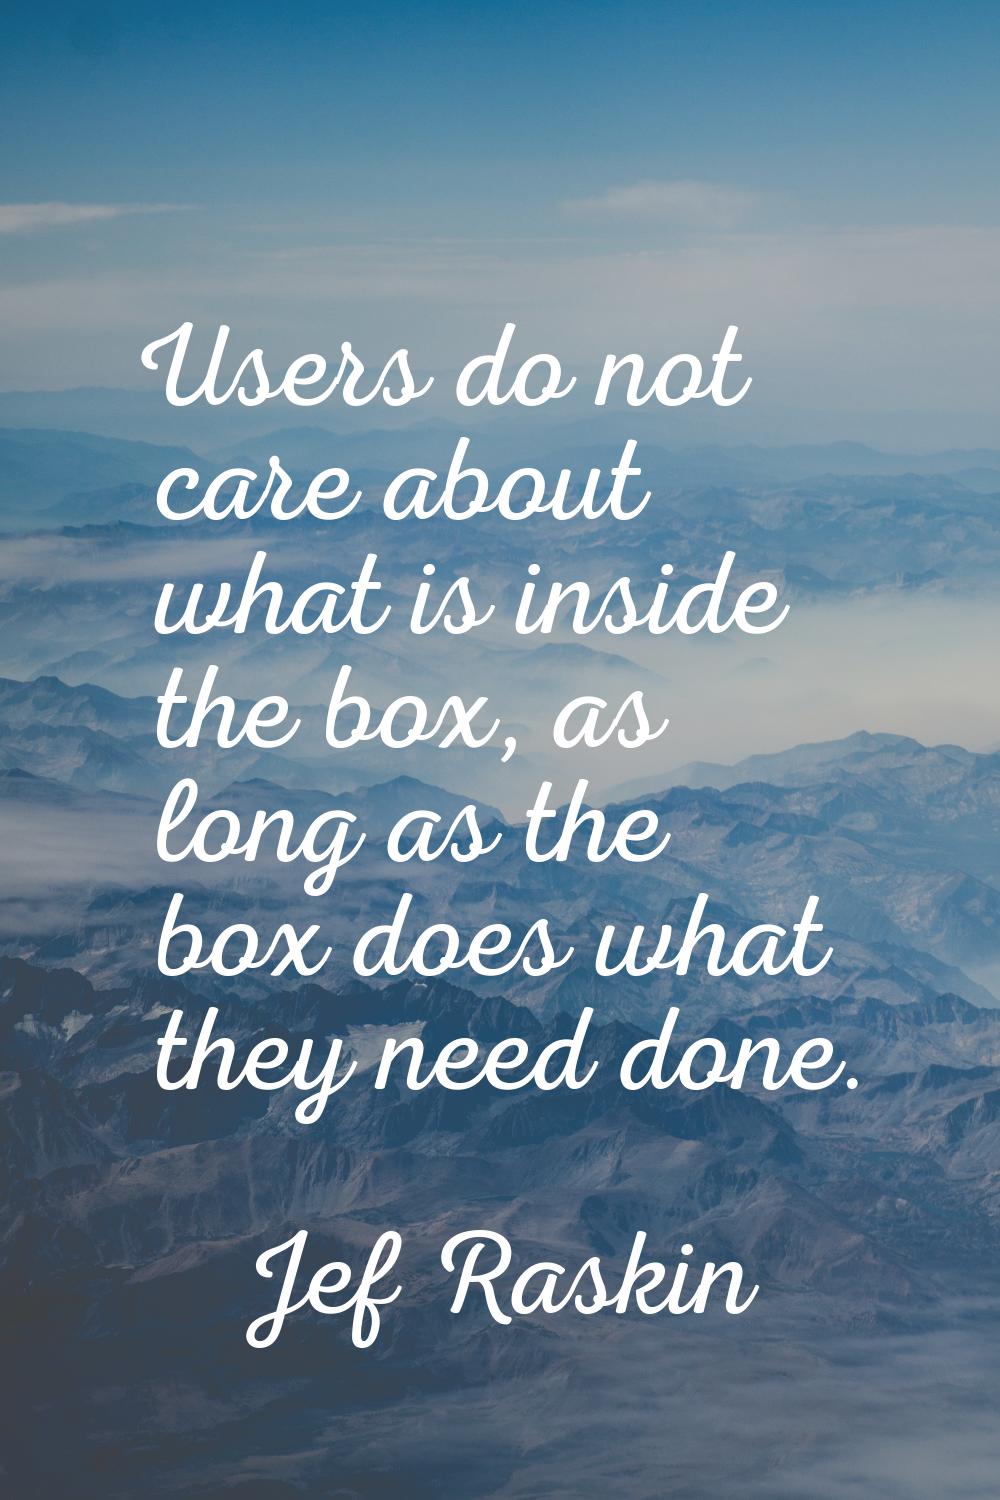 Users do not care about what is inside the box, as long as the box does what they need done.